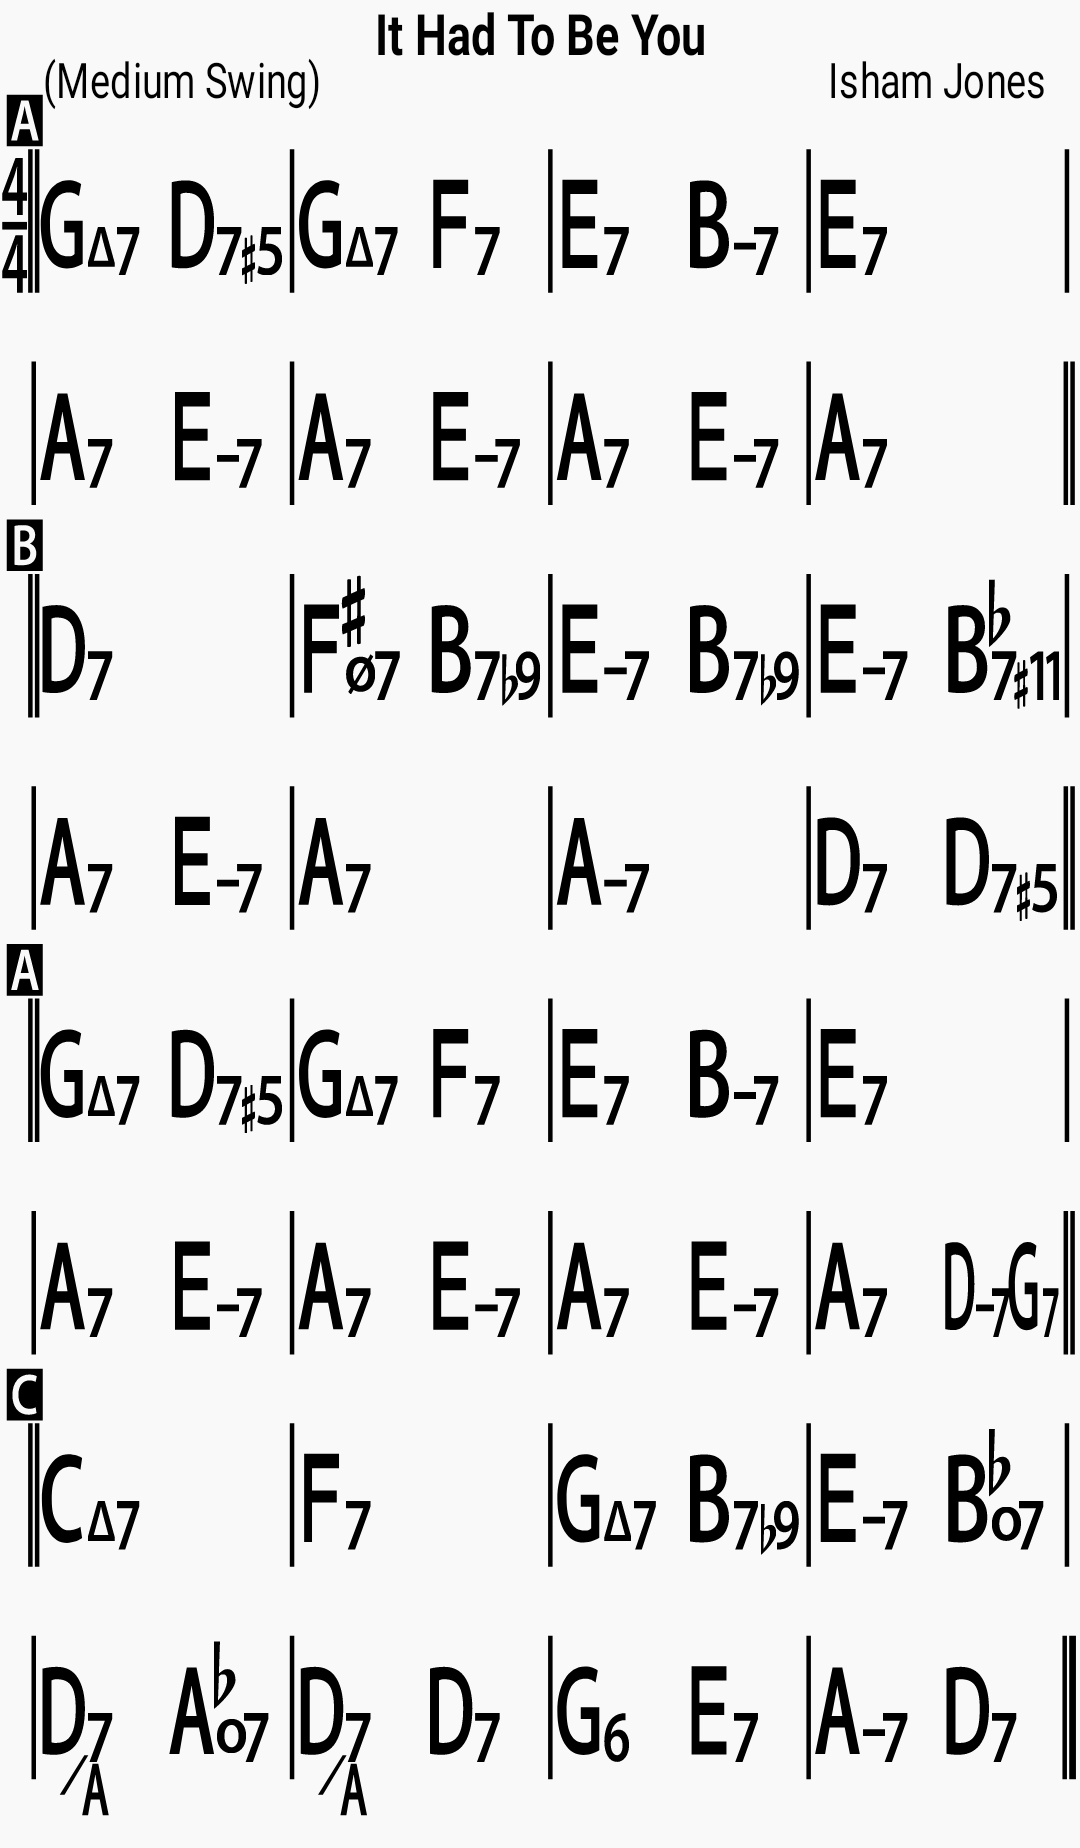 Chord chart for the jazz standard It Had To Be You